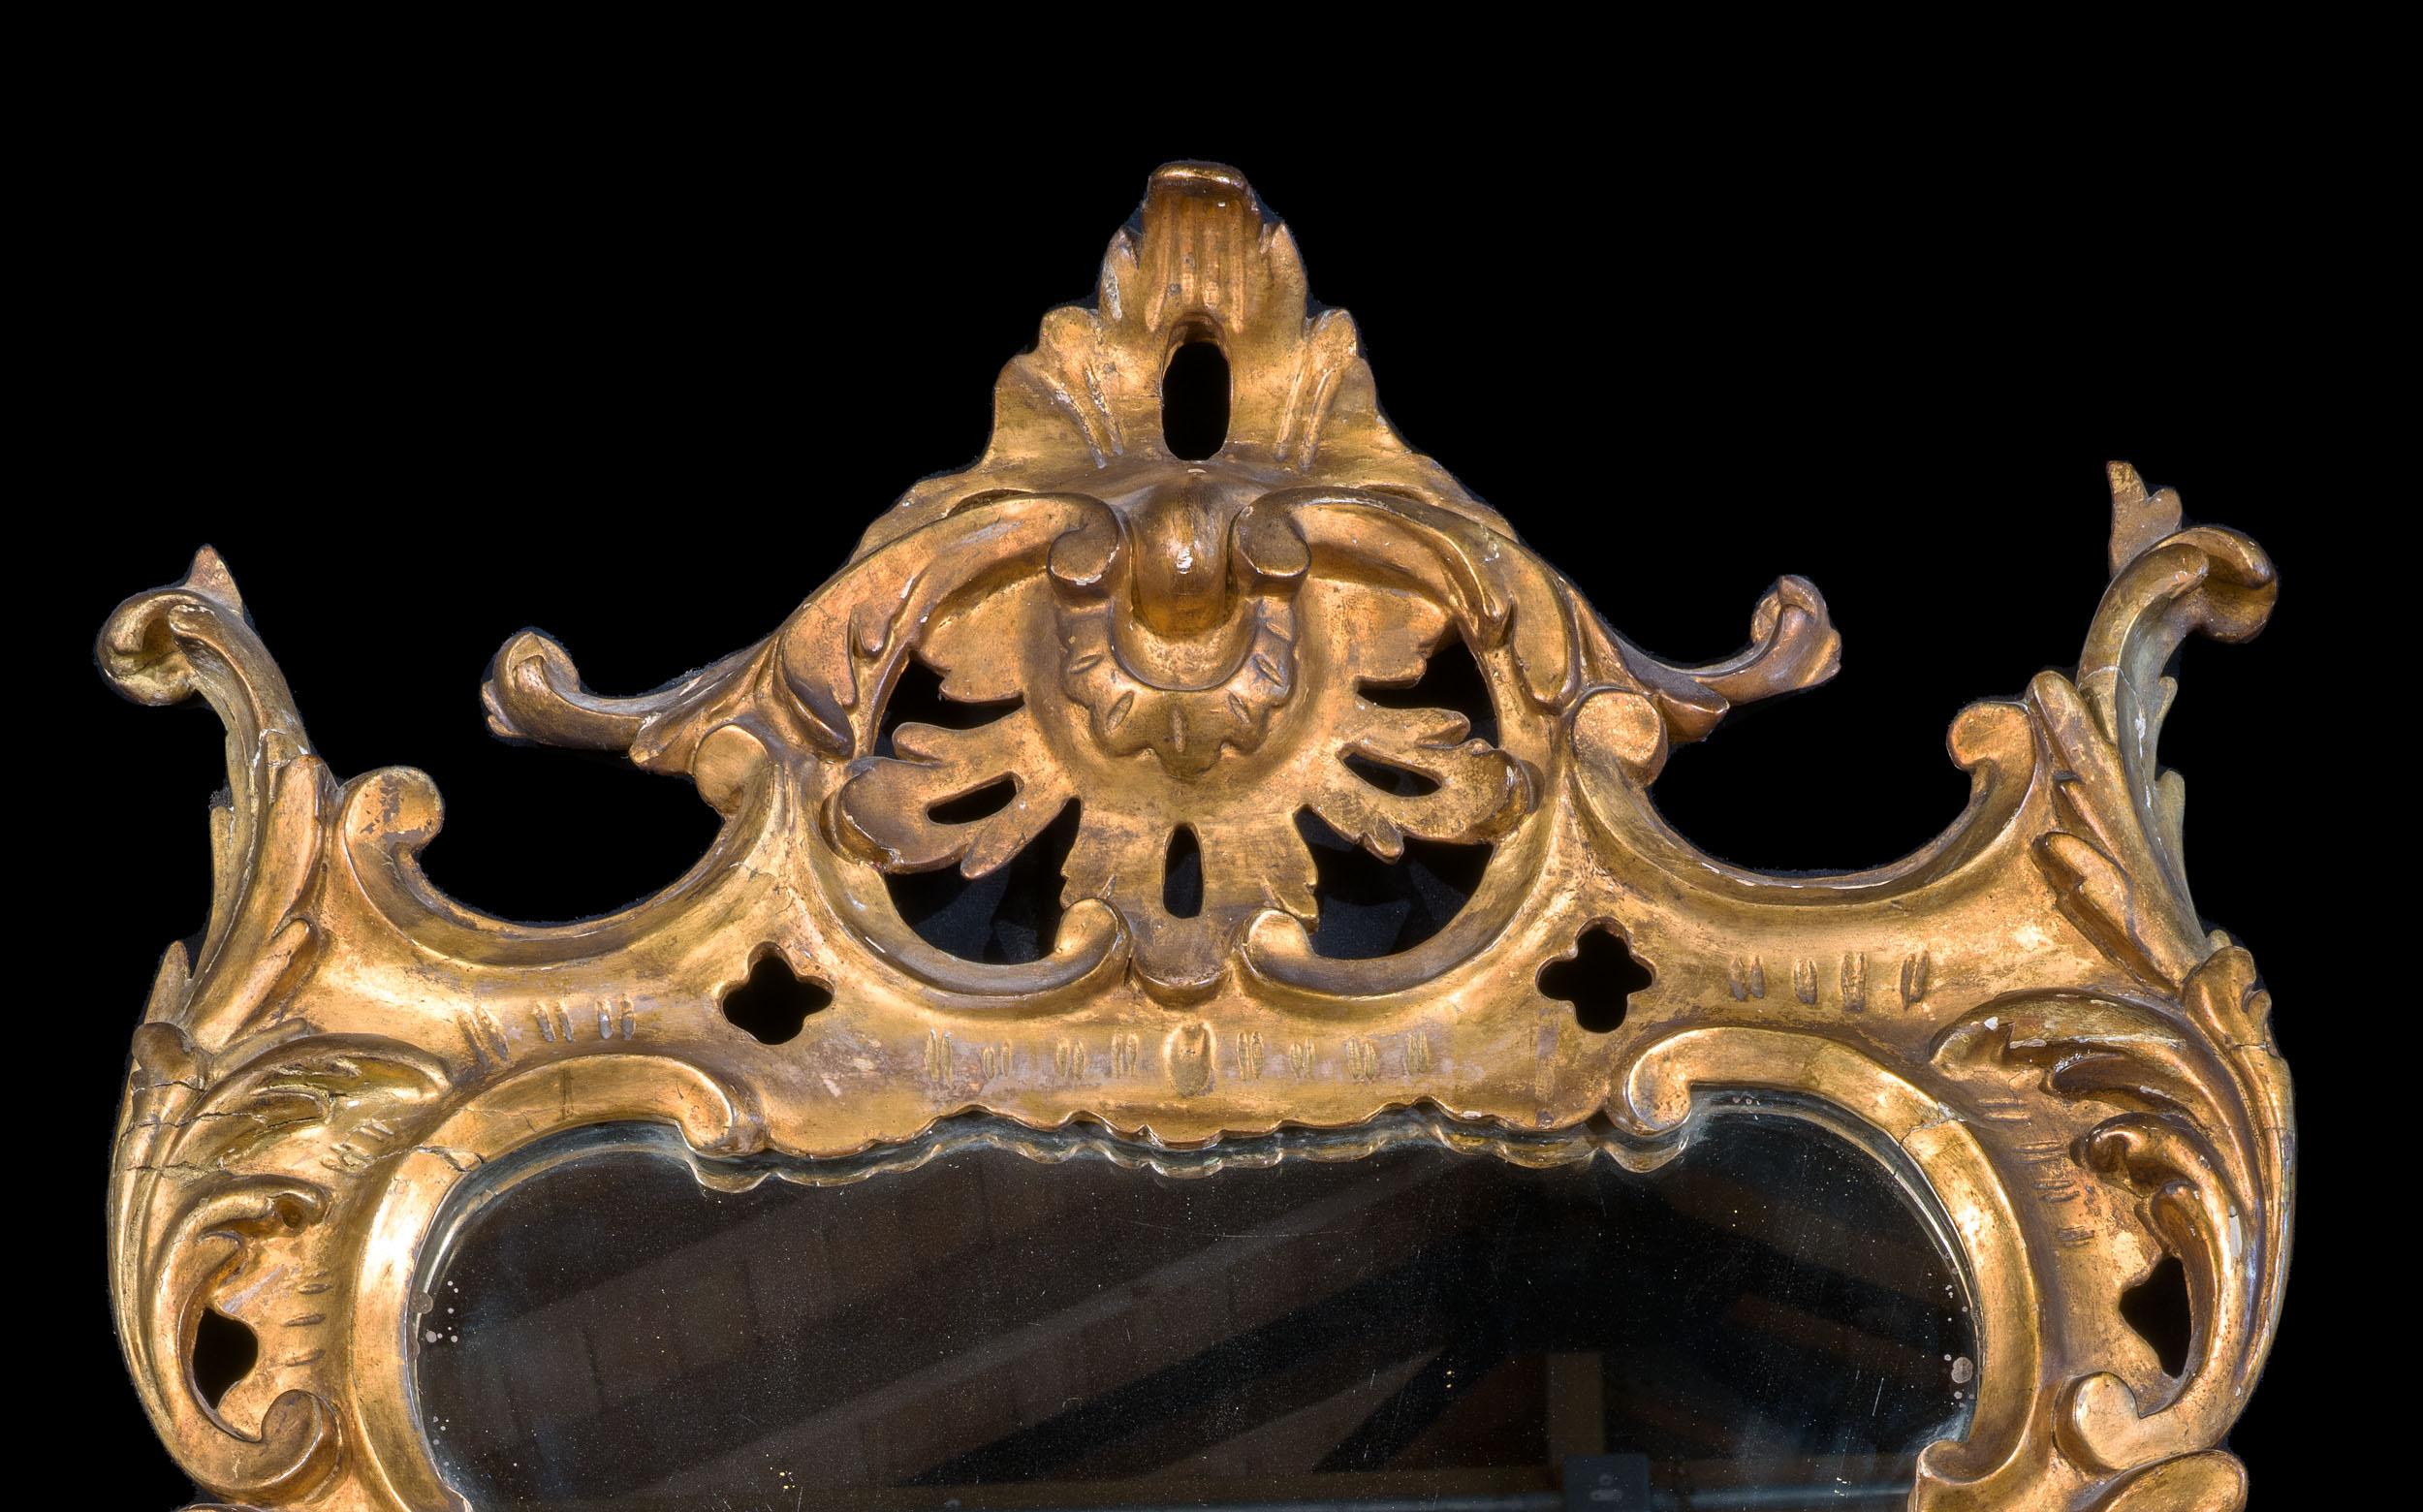 A fine George III Irish giltwood mirror. The elegant frame is carved with c scrolls and acanthus leaves, with floral garlands to the sides. The frame is surmounted by rocaille motif very much of the English Rococo style.

Irish, c.1760.